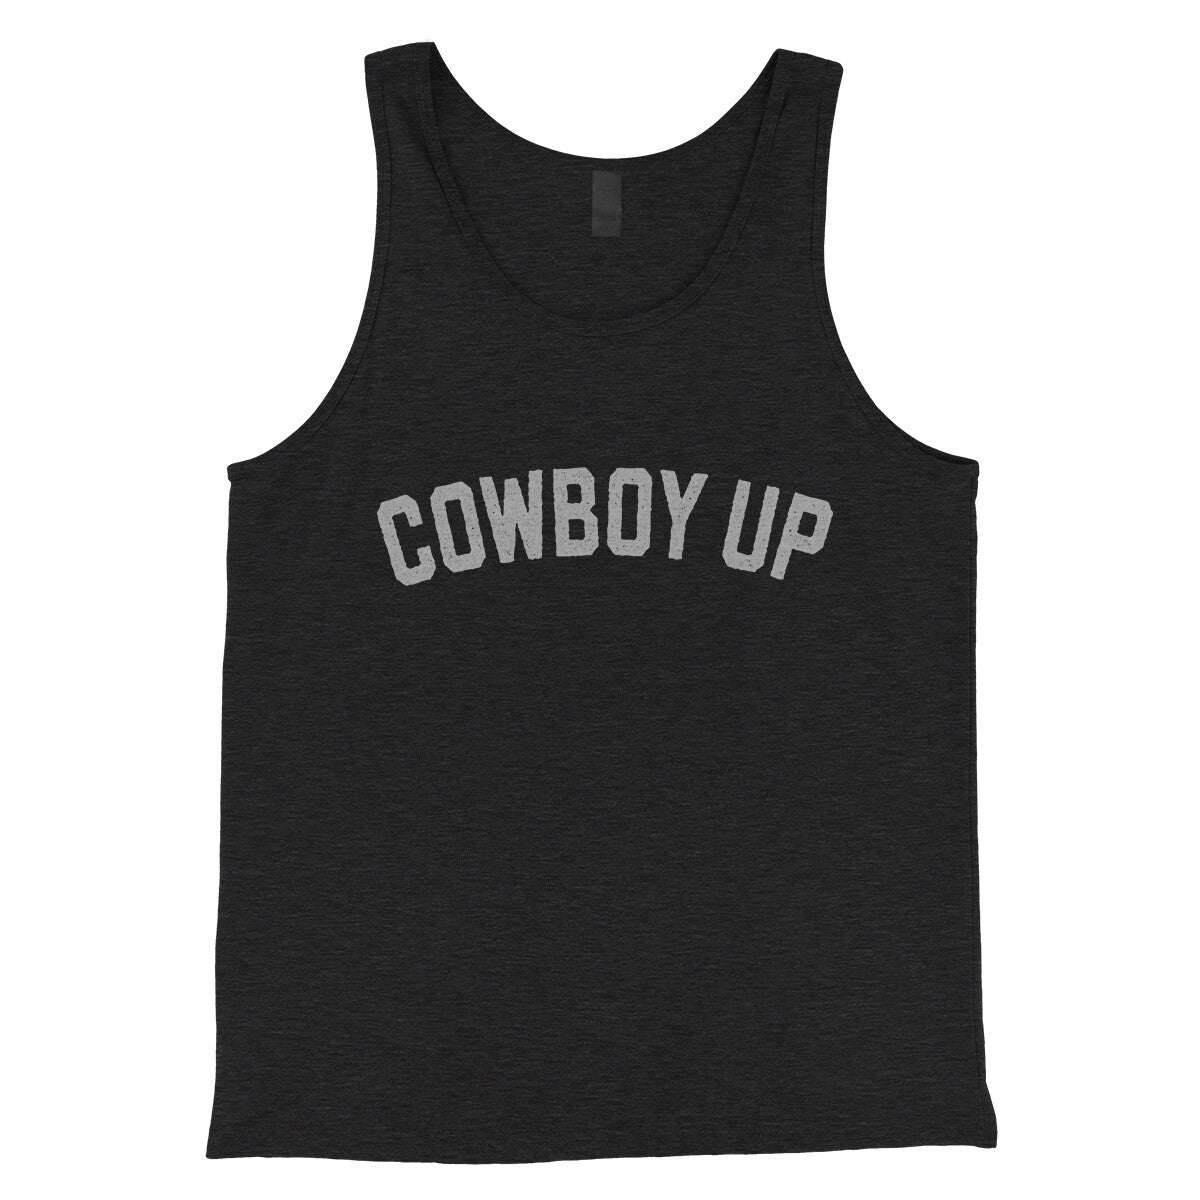 Cowboy Up in Charcoal Black TriBlend Color